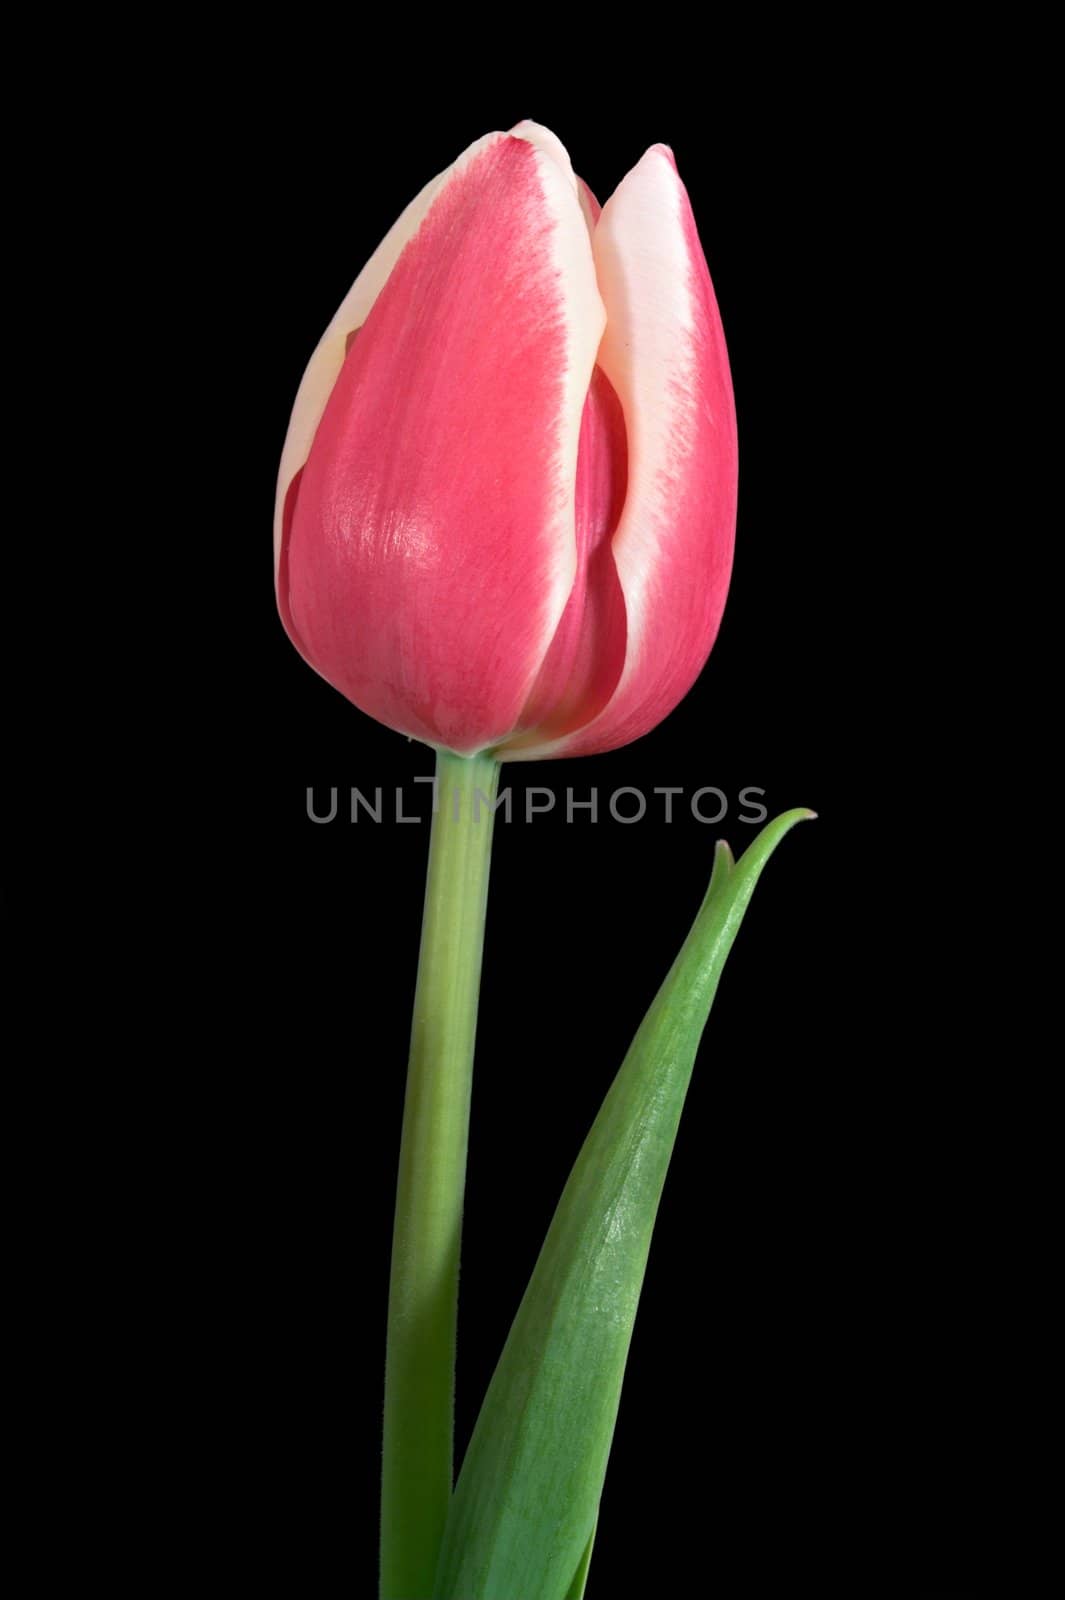 A red tulip and green stem isolated over a black background